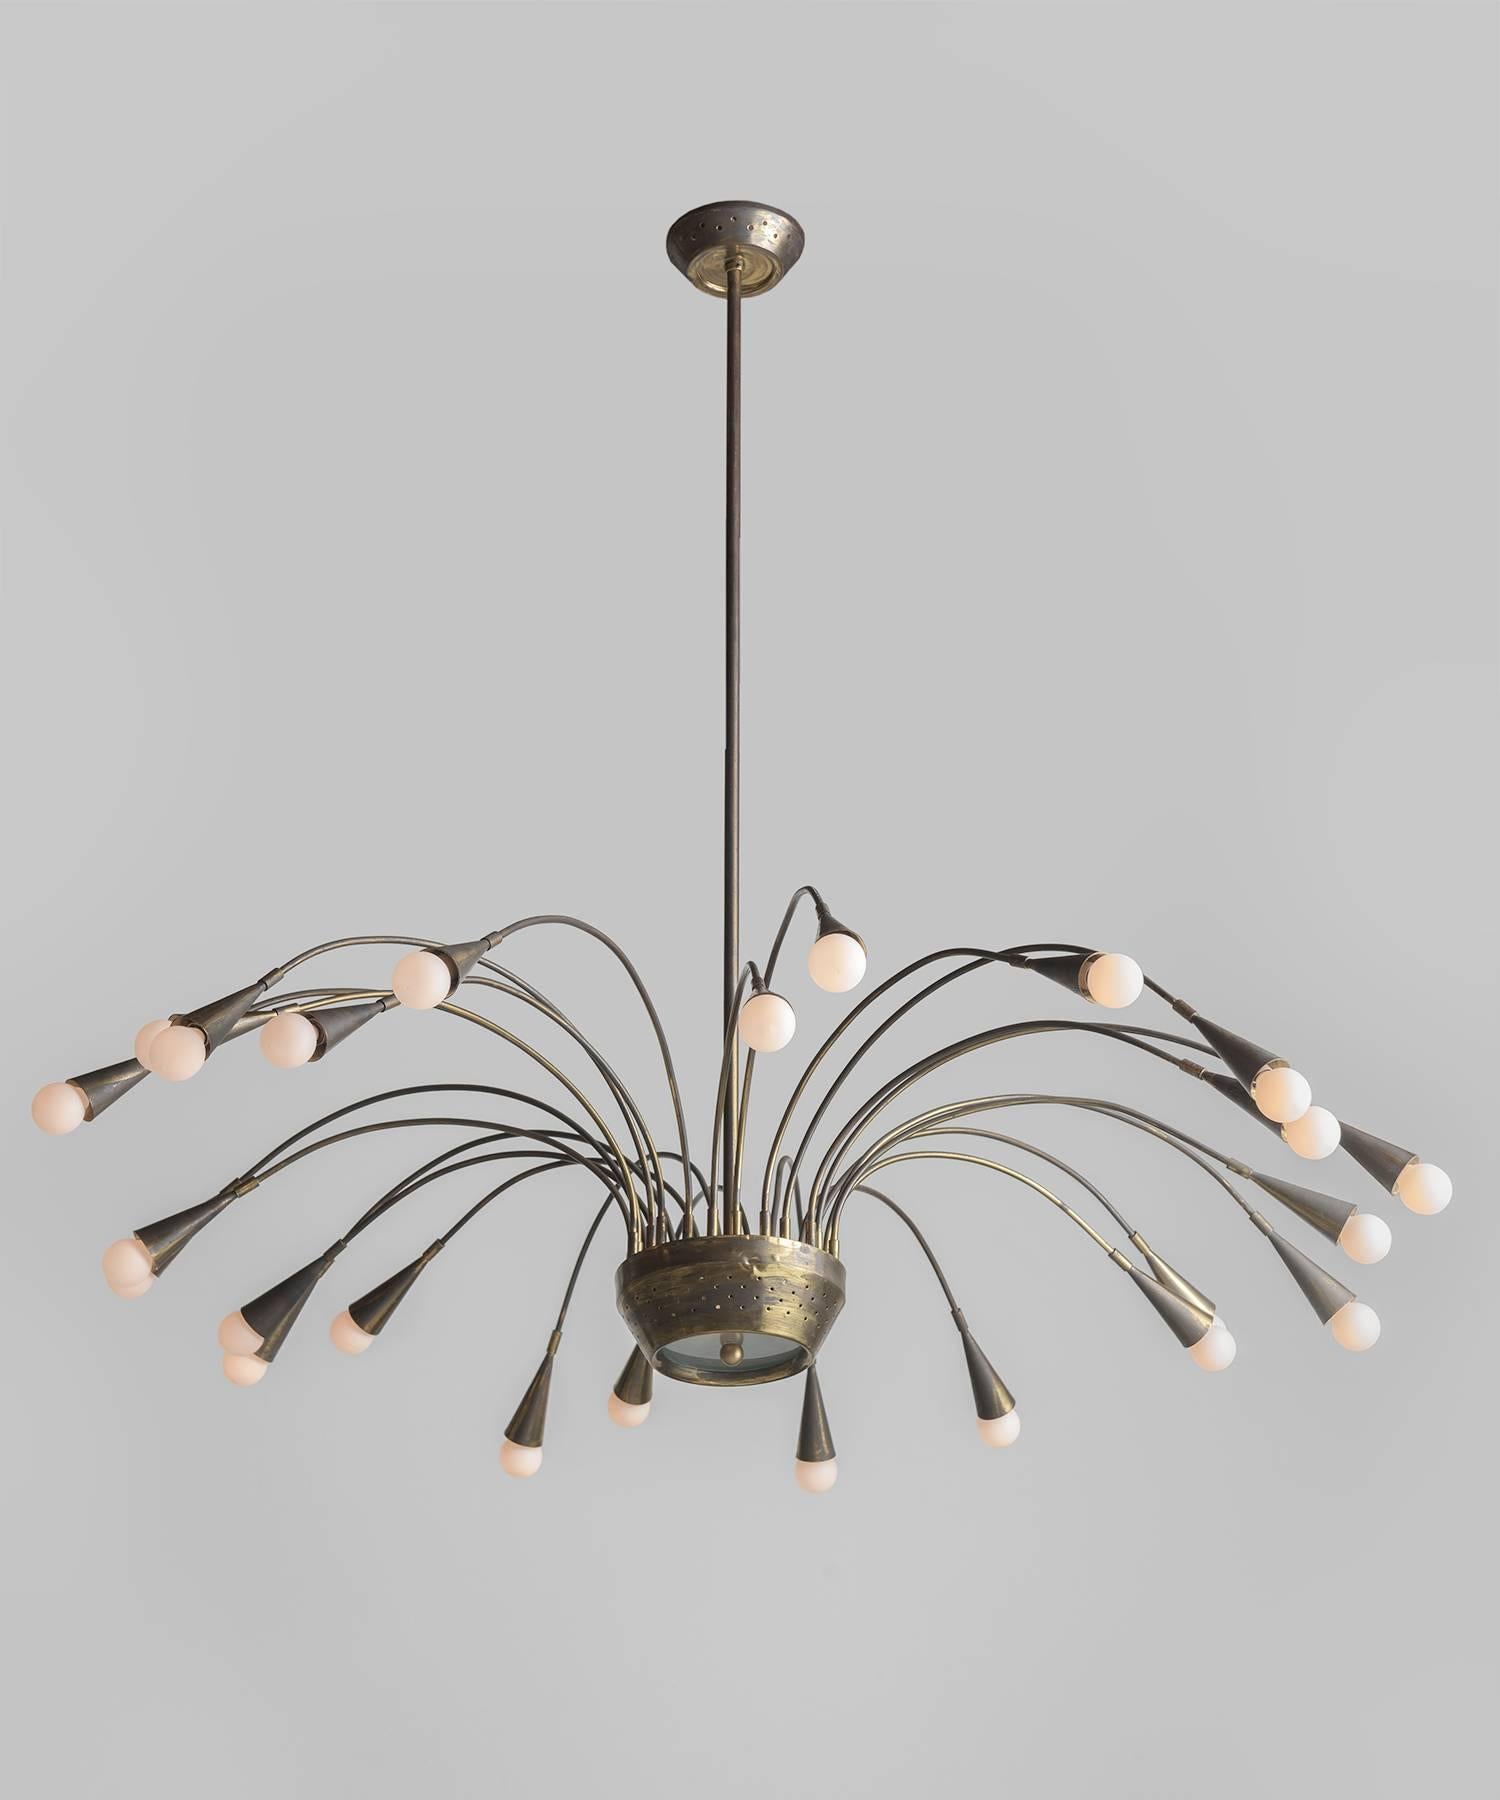 Stilnovo Brass Chandelier, circa 1950

Wonderfully patinated with a perforated centerpiece that supports (24) lights. 

11